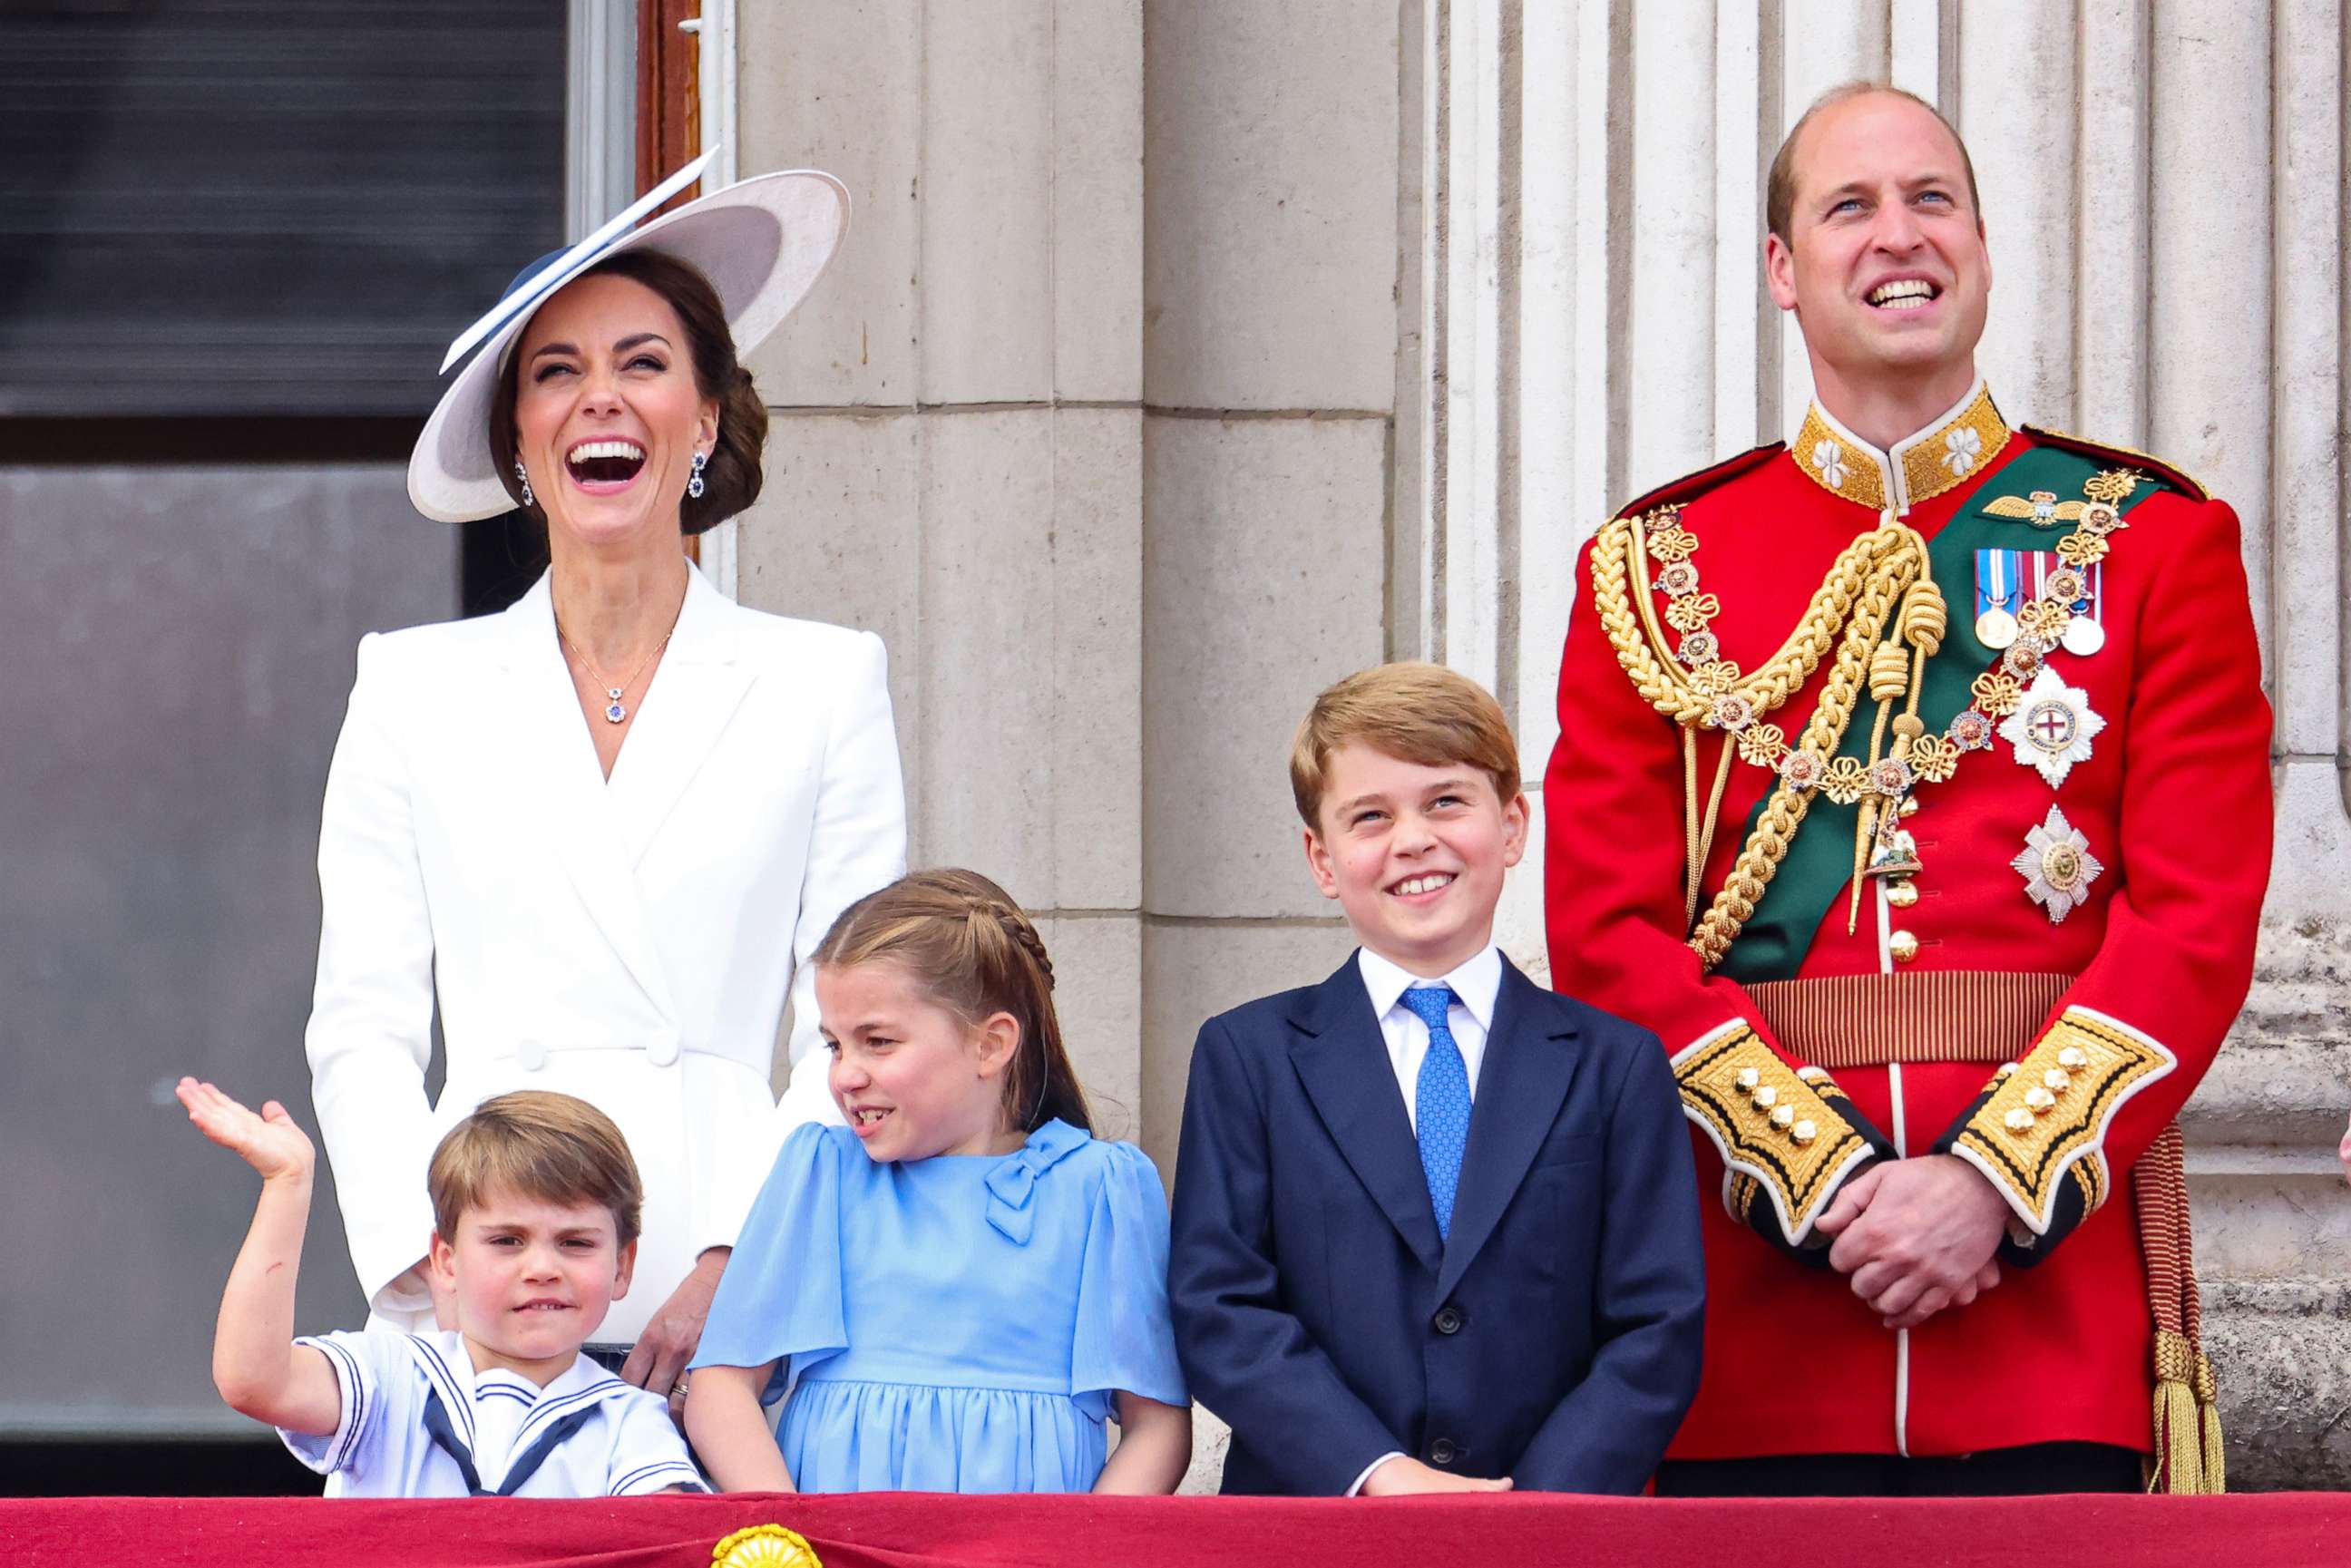 PHOTO: Prince Louis, Catherine, Duchess of Cambridge, Princess Charlotte, Prince George and Prince Willia watch the RAF flypast on the balcony of Buckingham Palace during the Trooping the Color parade on June 2, 2022 in London.